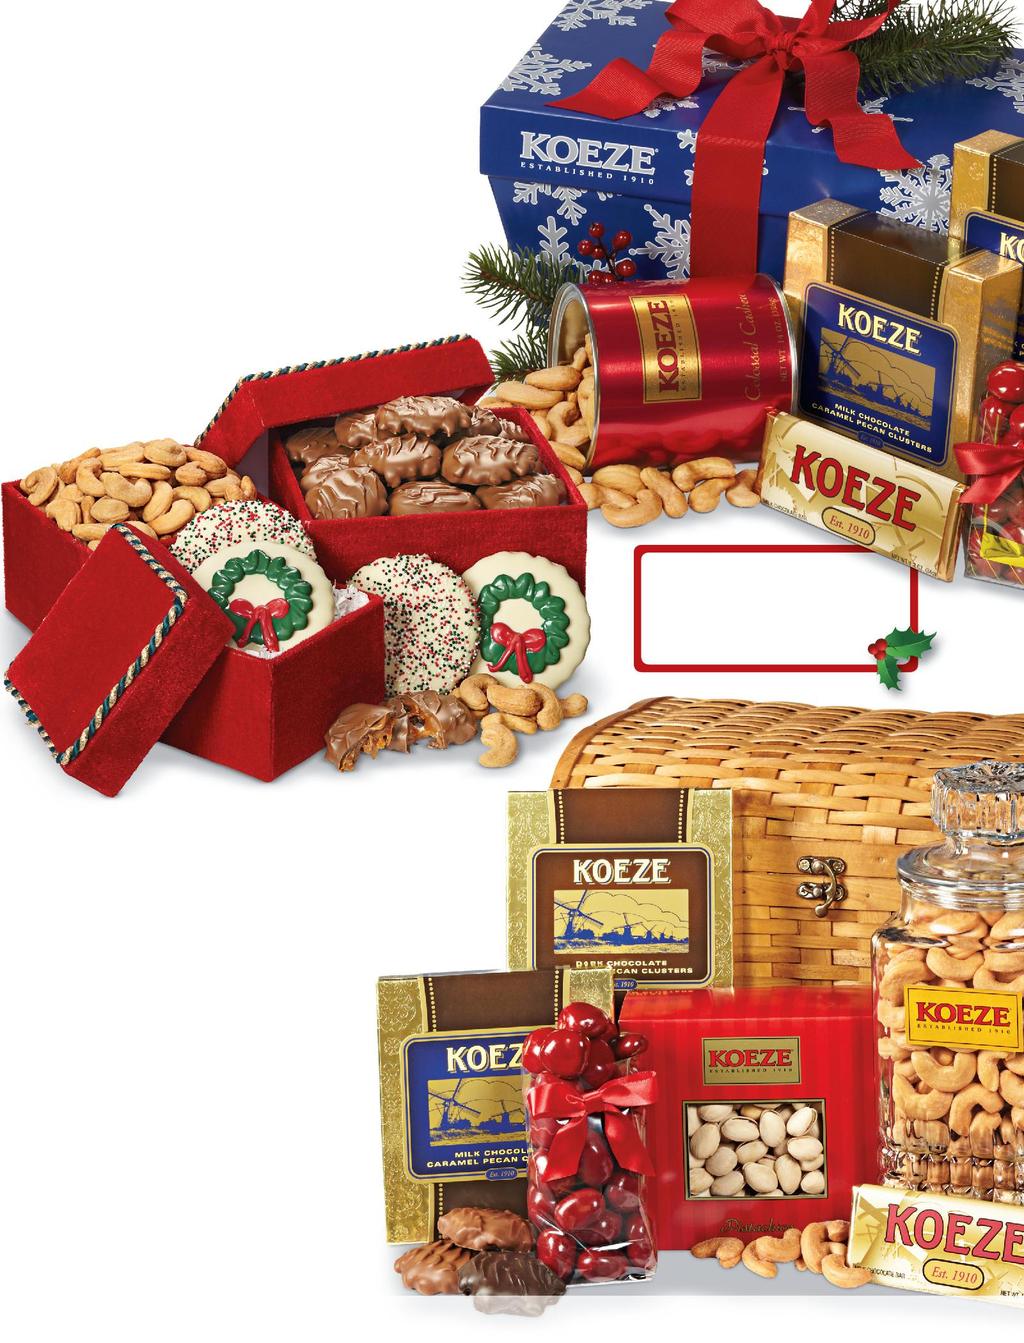 ÕTIS THE SEASON FAVORITES BOX This elegant box hits all the right notes with best-selling Koeze favorites including our signature Colossal Cashews, luxurious milk chocolate turtles and luscious